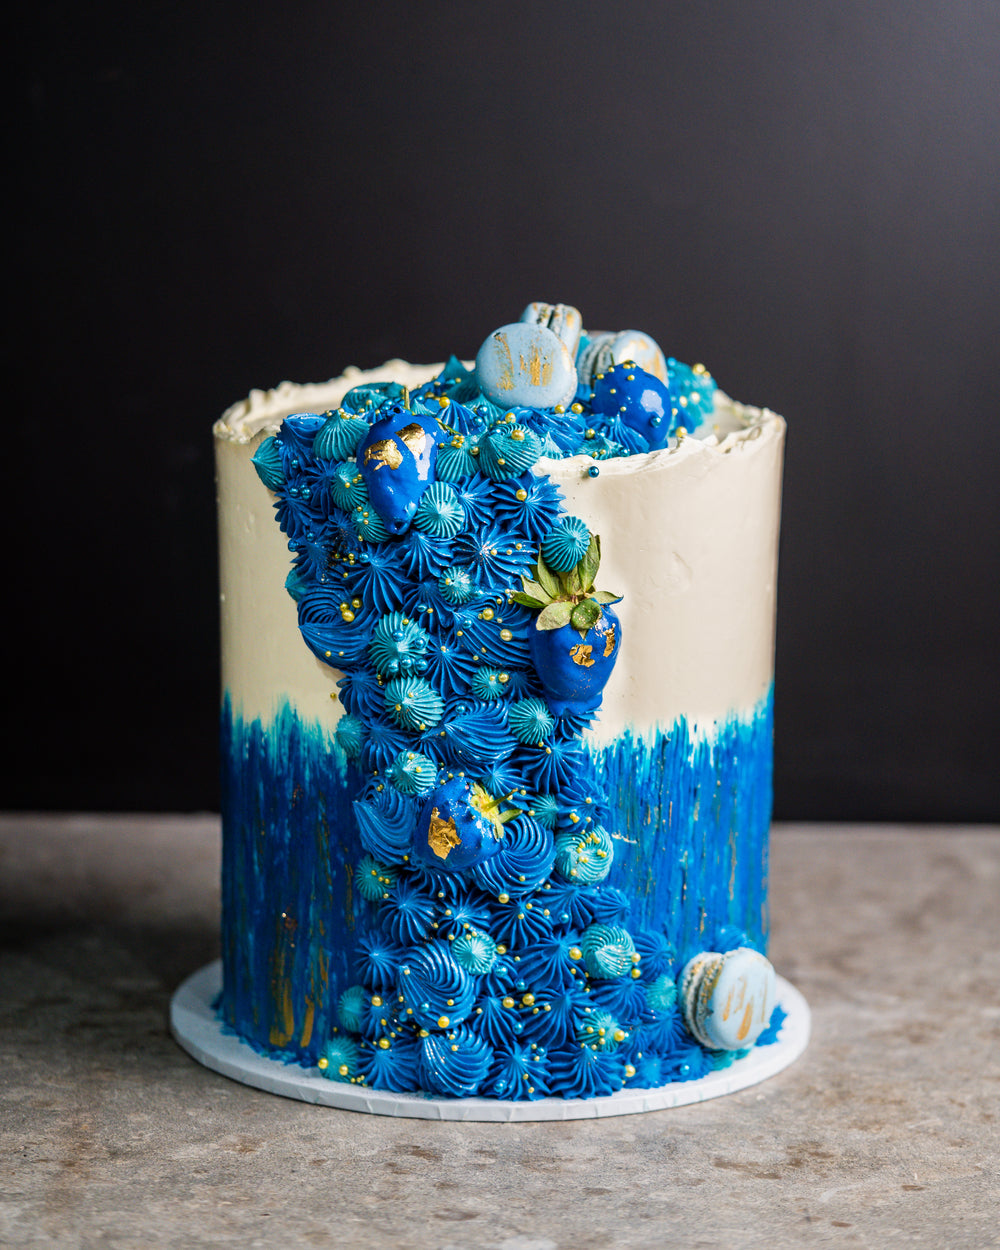 Stormy Blue Swirl Piped Cake